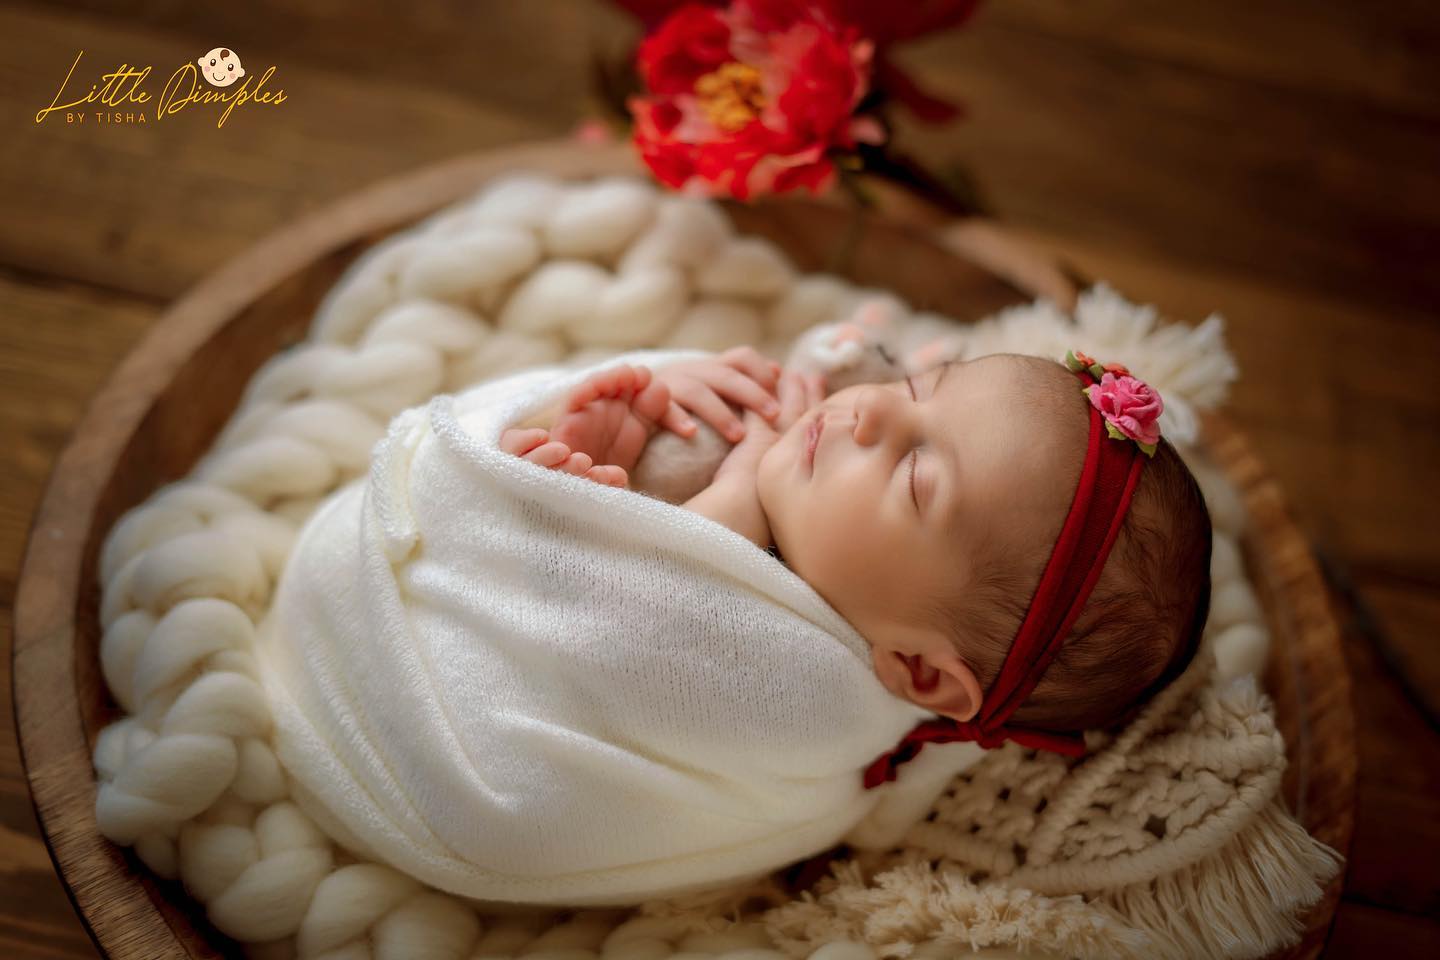 We specialize in elegant newborn photography and Baby Photoshoot Bangalore. If you are looking for baby photography or newborn photoshoot in Bangalore, contact us now!